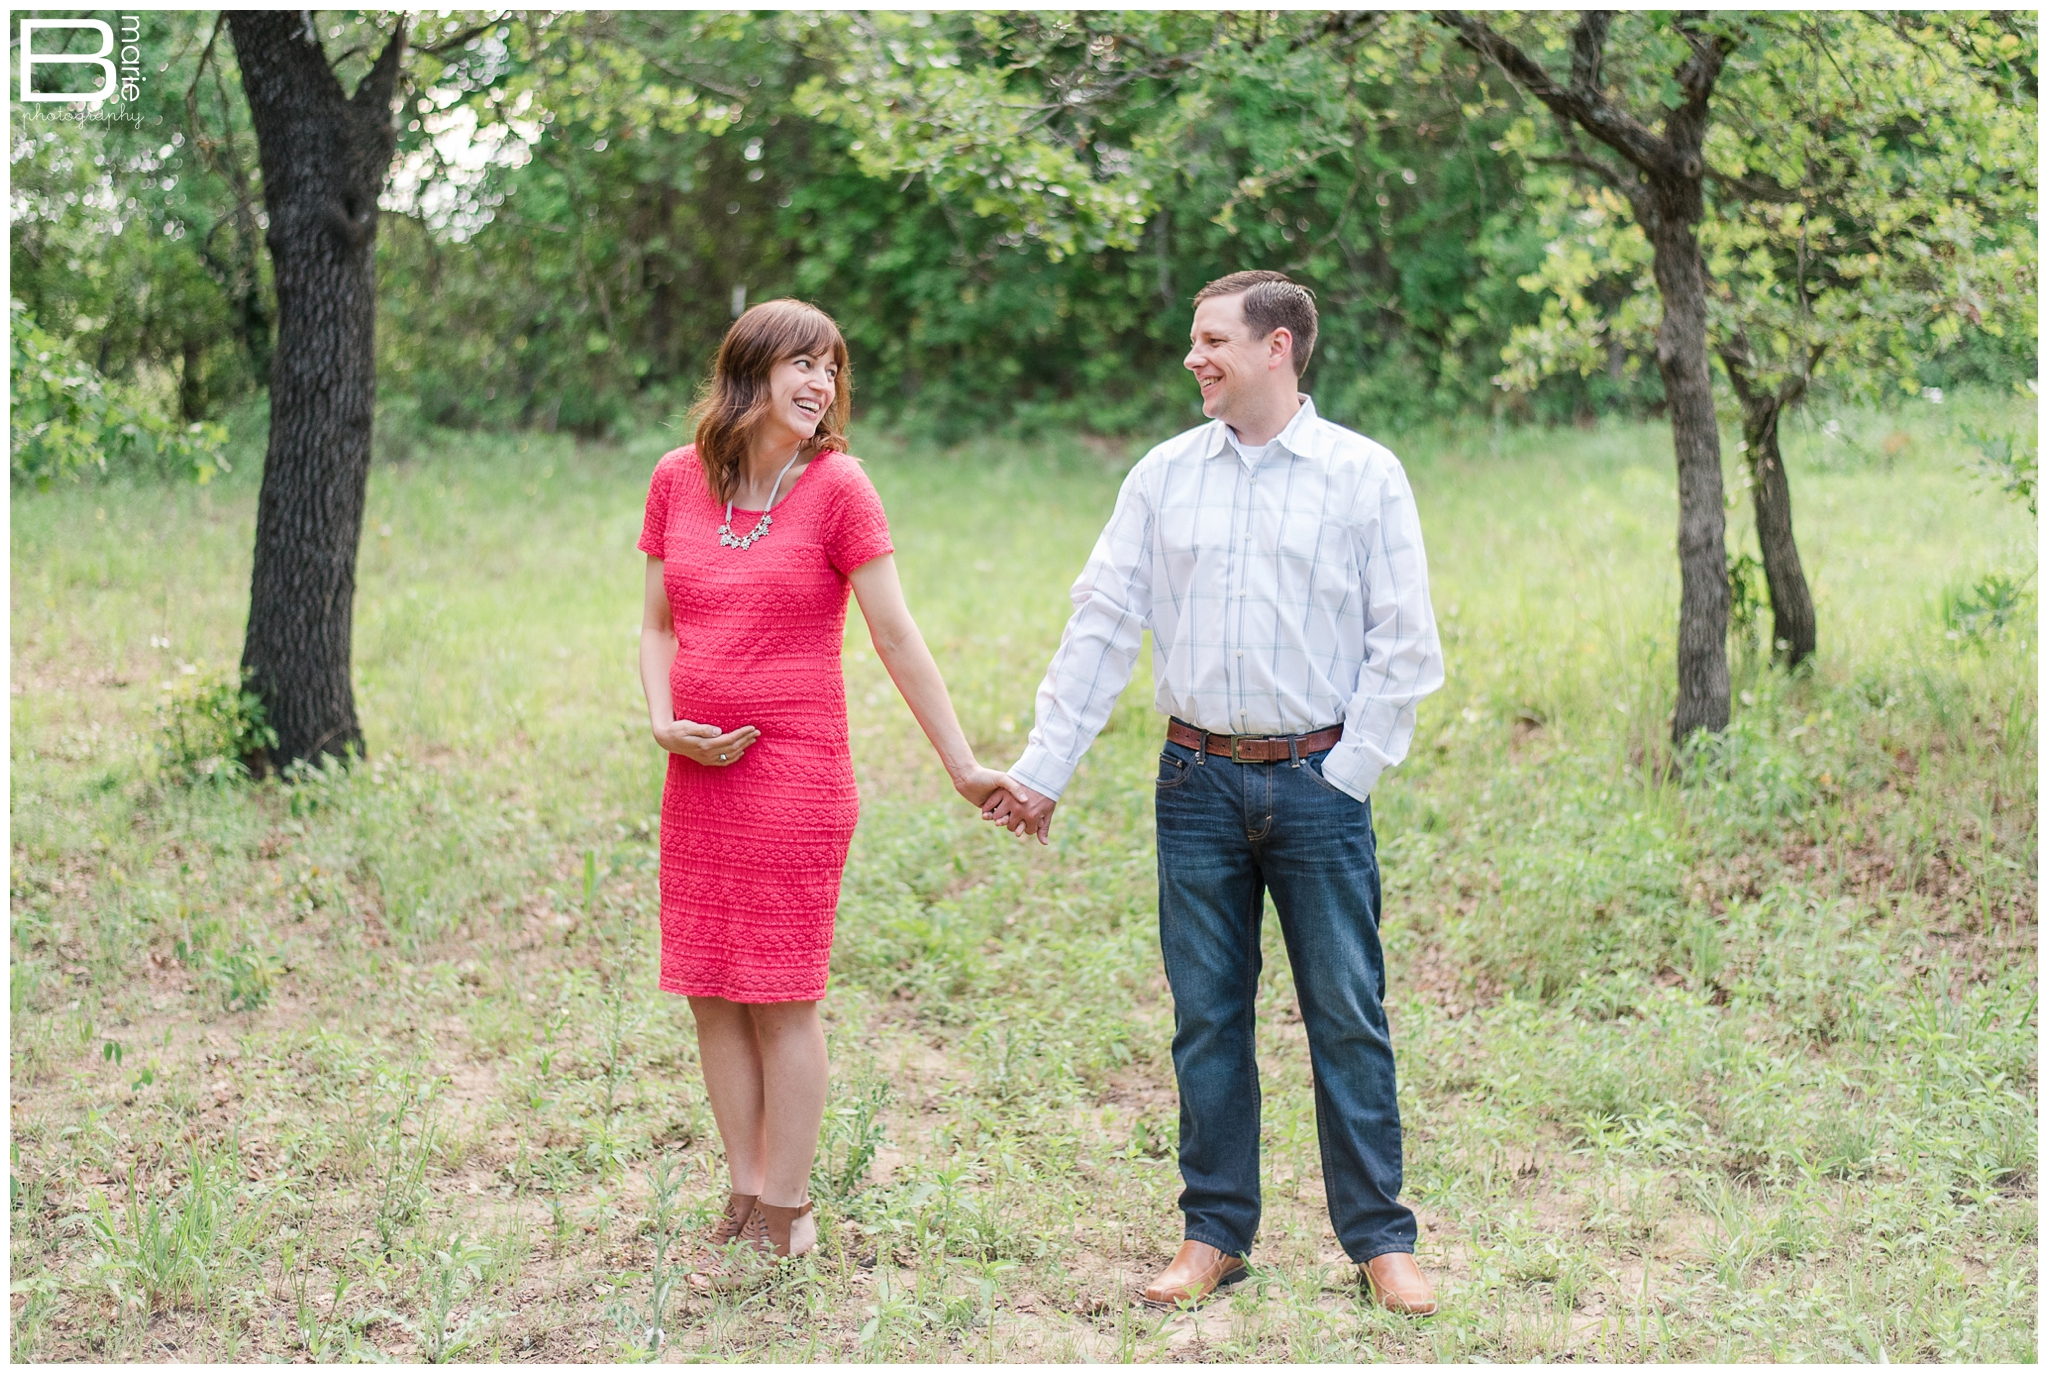 Kingwood Maternity Photographer - maternity session on ranch with two dogs